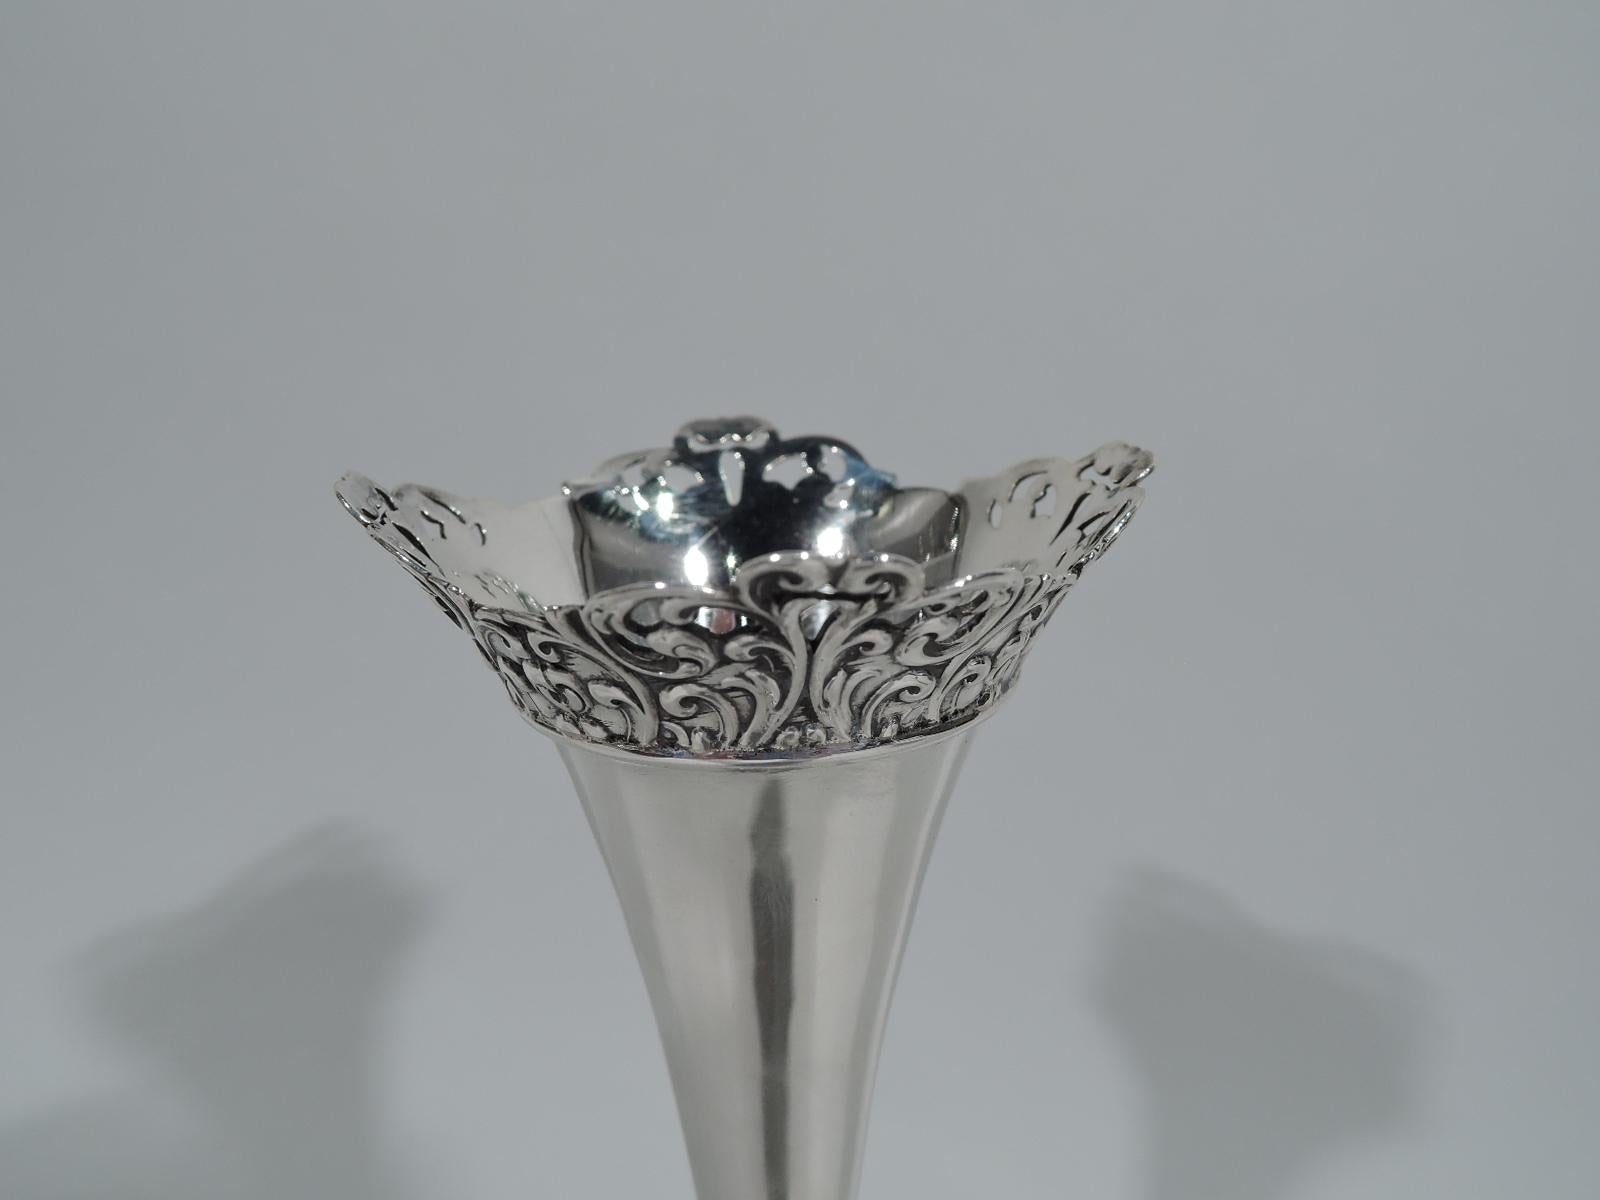 Victorian sterling silver bud vase. Made by Whiting in New York, circa 1890. Tall and narrow cone mounted to domed foot with loose and vertical scrolls and flowers. Rim scrolled and asymmetrical with pierced same. Hallmark includes no. 5266. Weight: